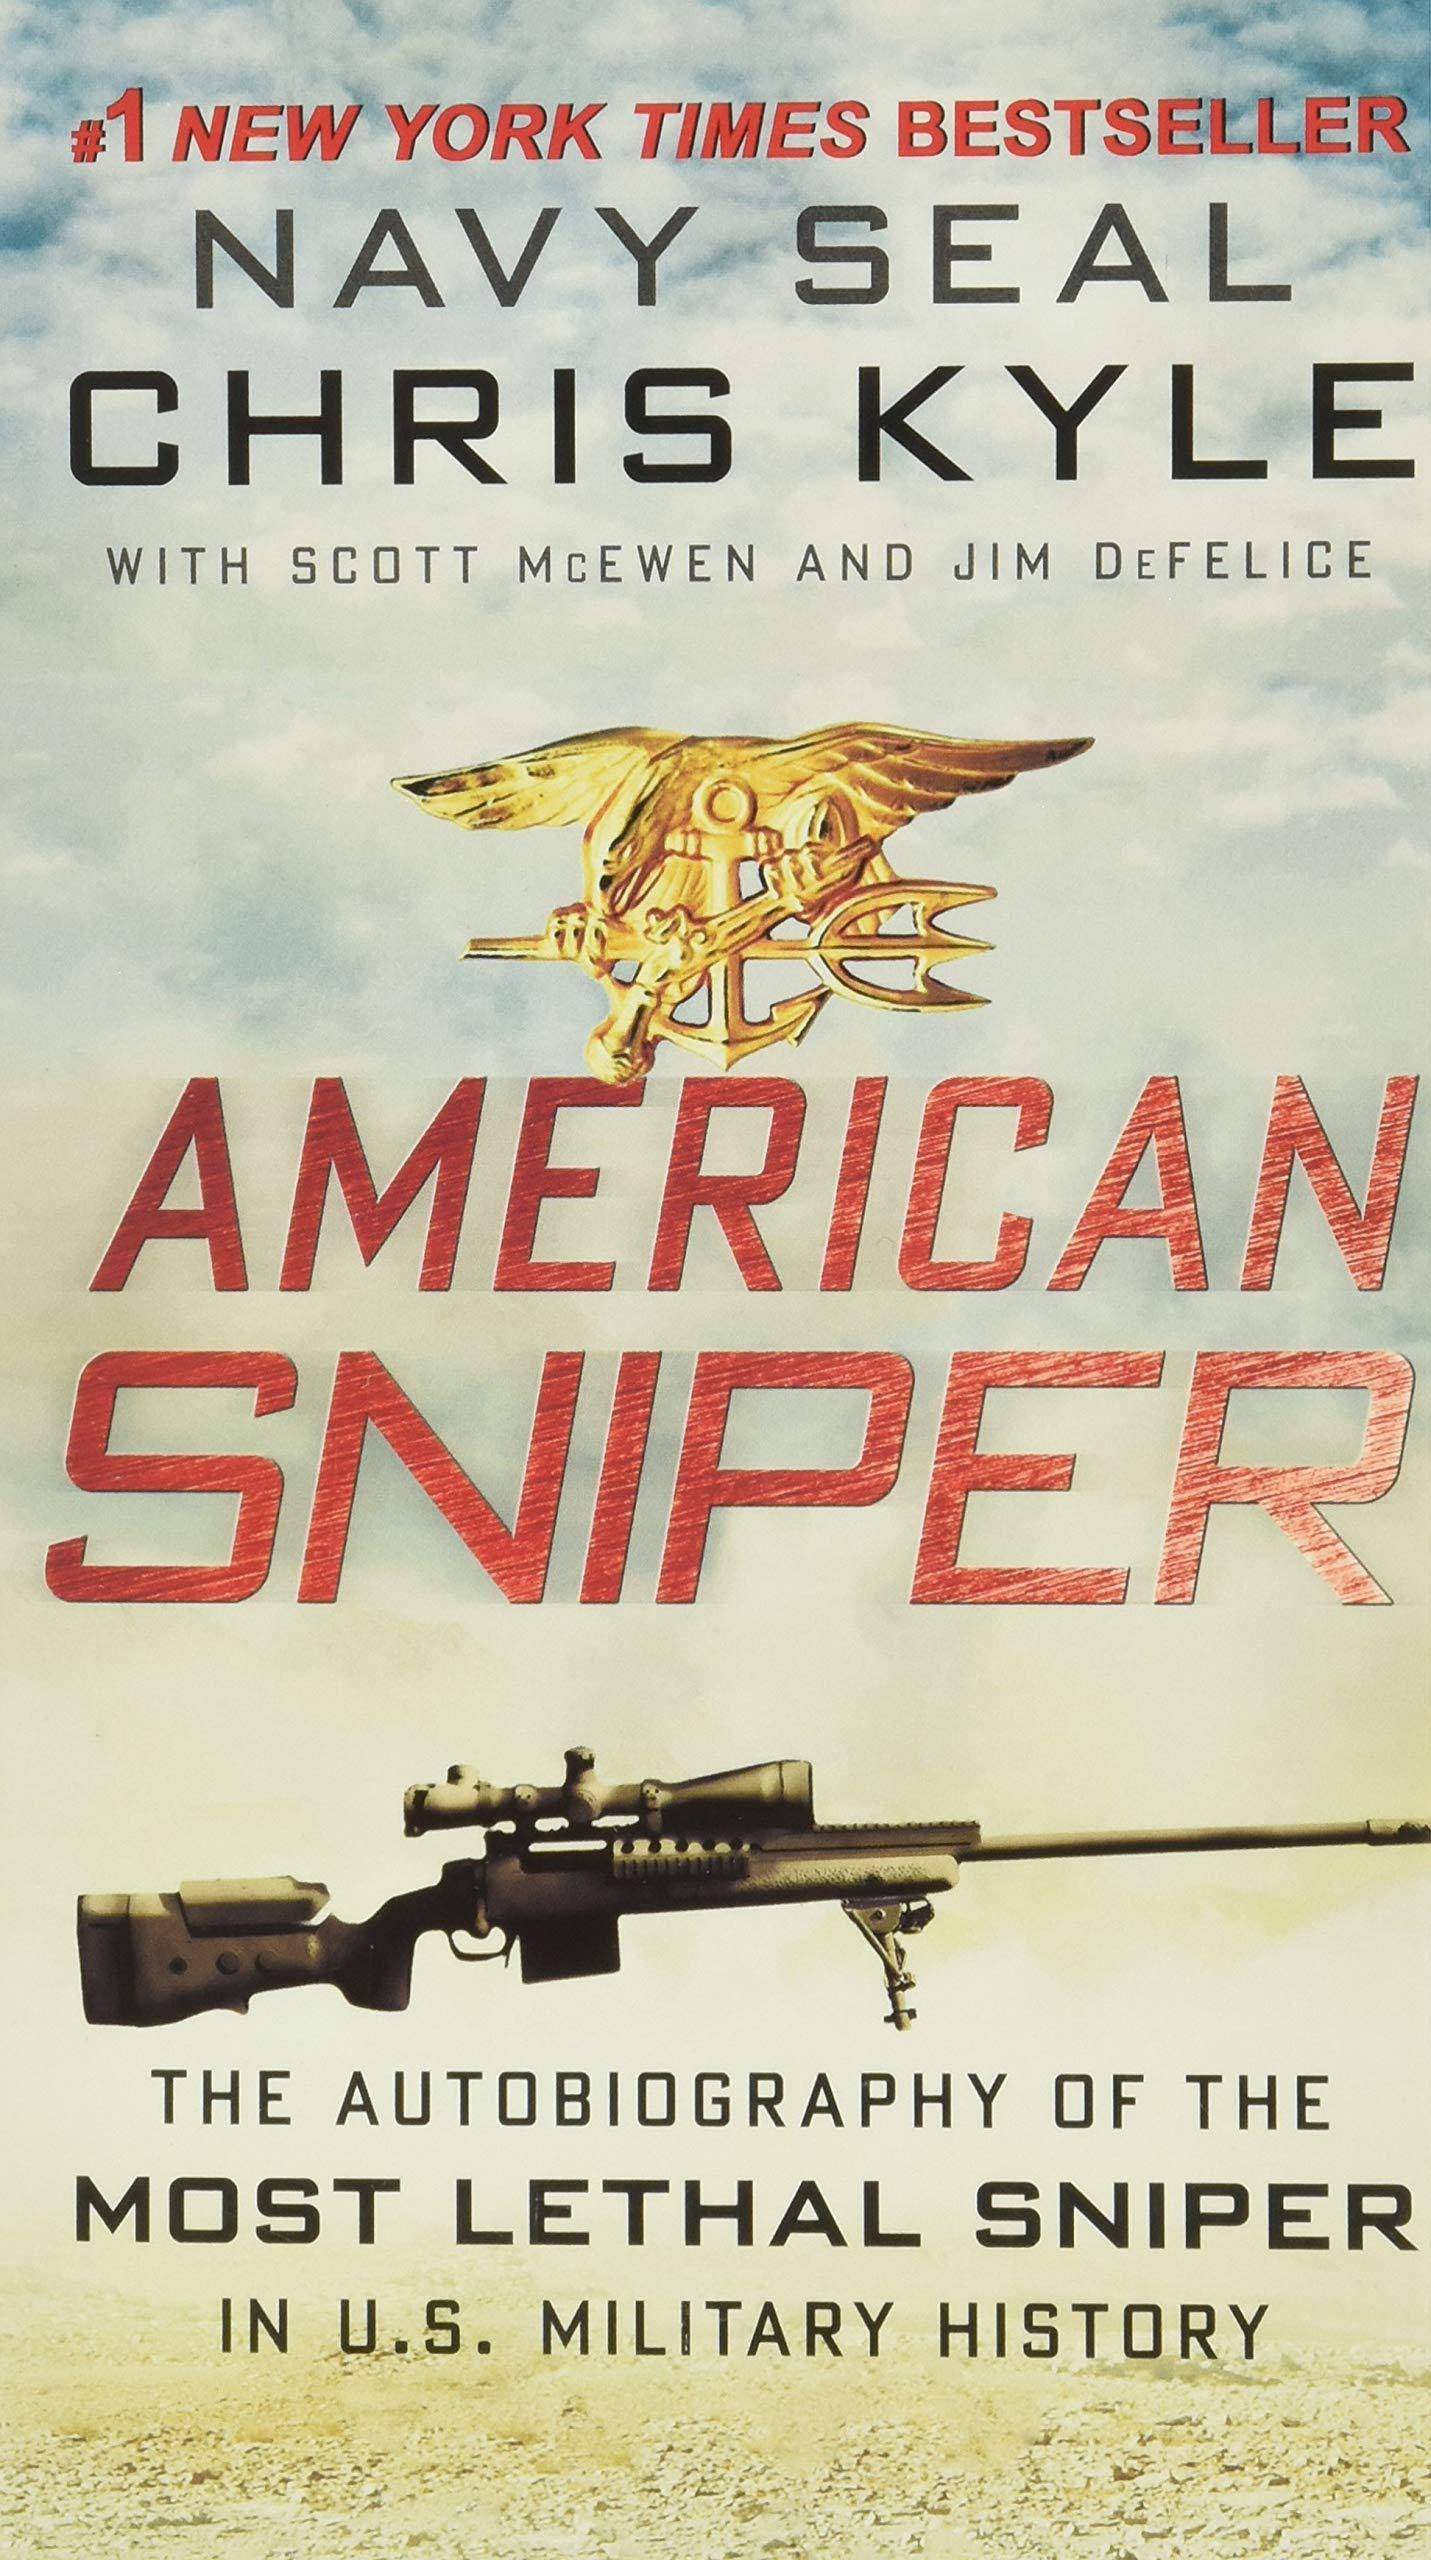 American Sniper: The Autobiography of the Most Lethal Sniper in - SureShot Books Publishing LLC